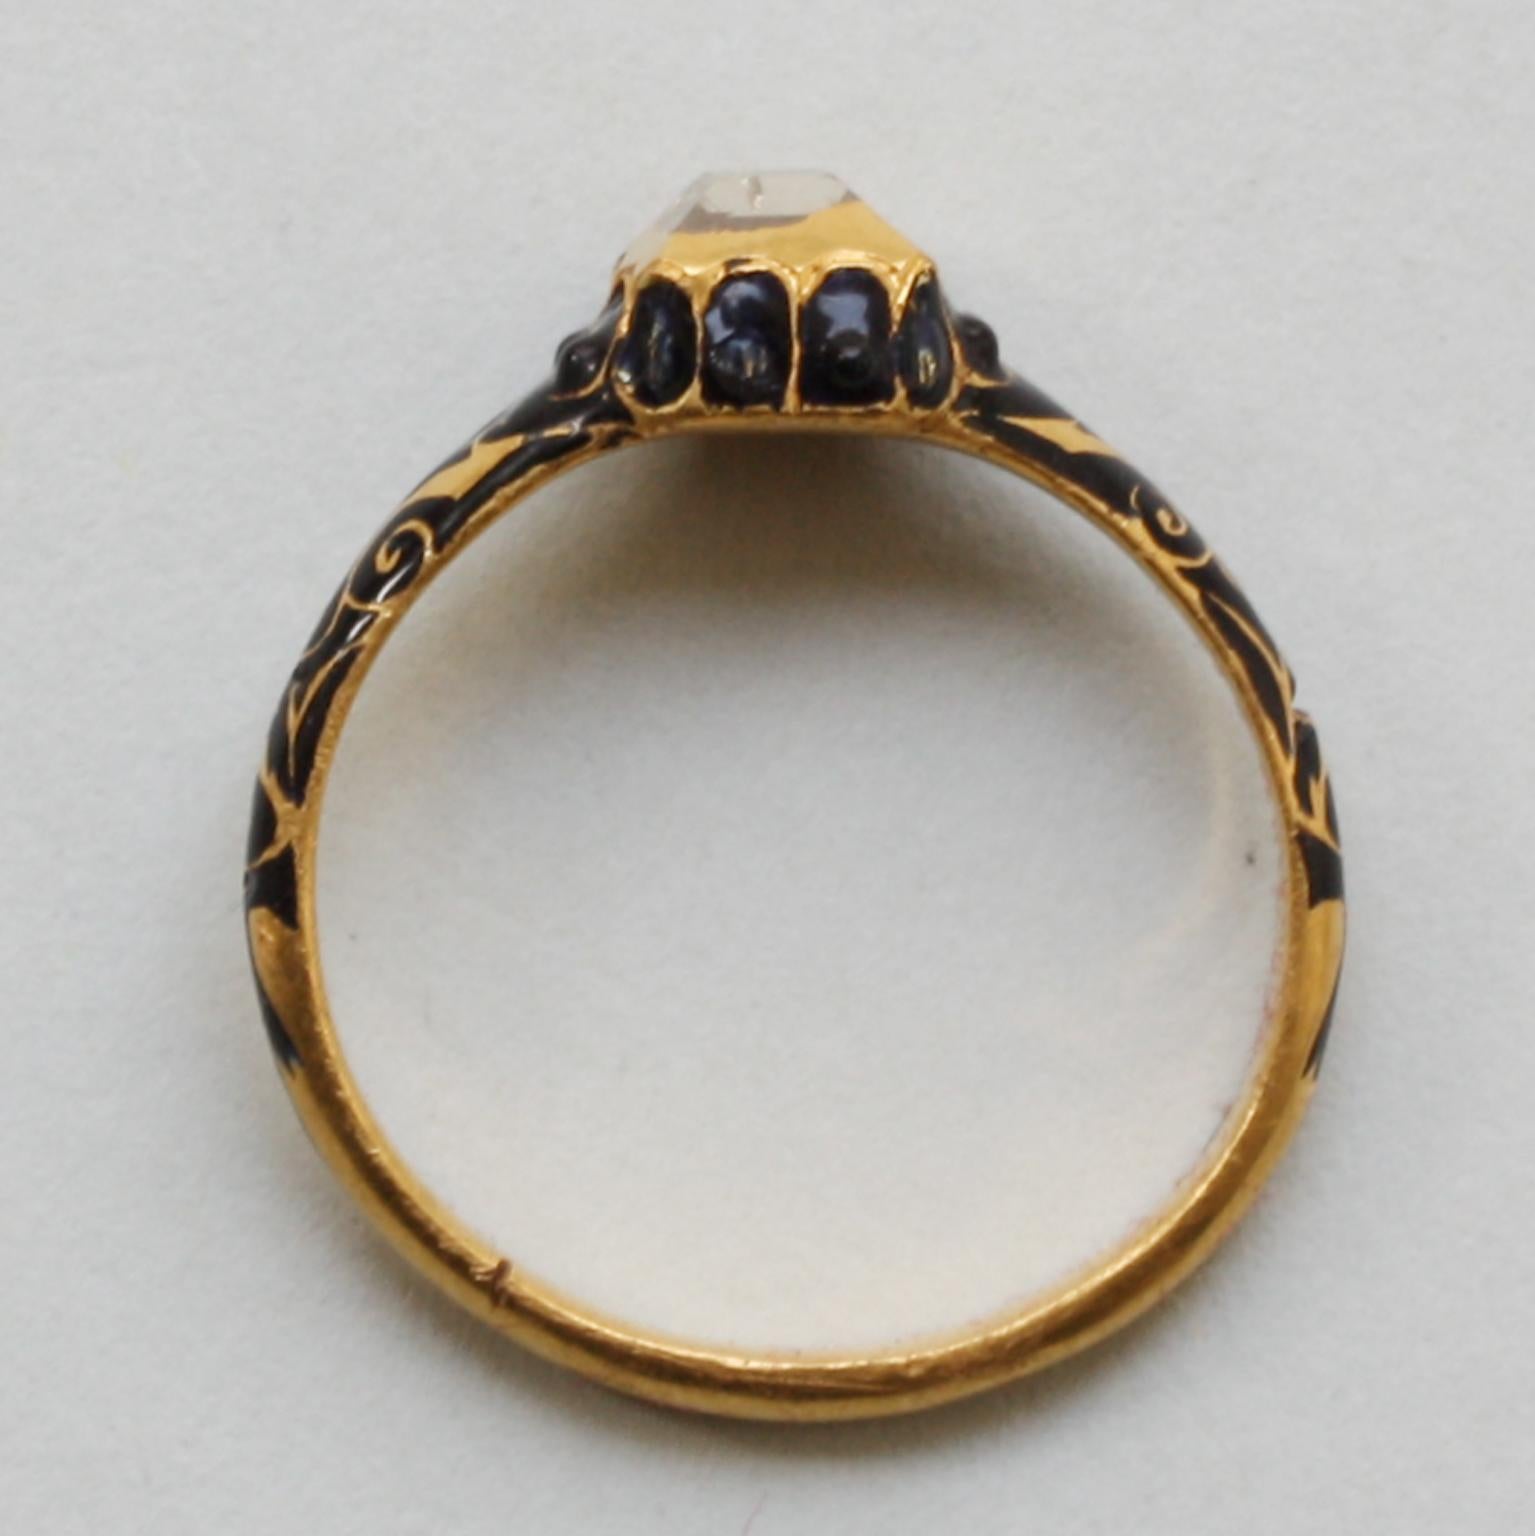 A rare gold ring with a table-cut diamond in a box setting. The shank is decorated with arabesques and foliate ornaments in dark blue champlevé enamel. Western European, circa 1600. Found in Friesland and registered with the Archeological Services